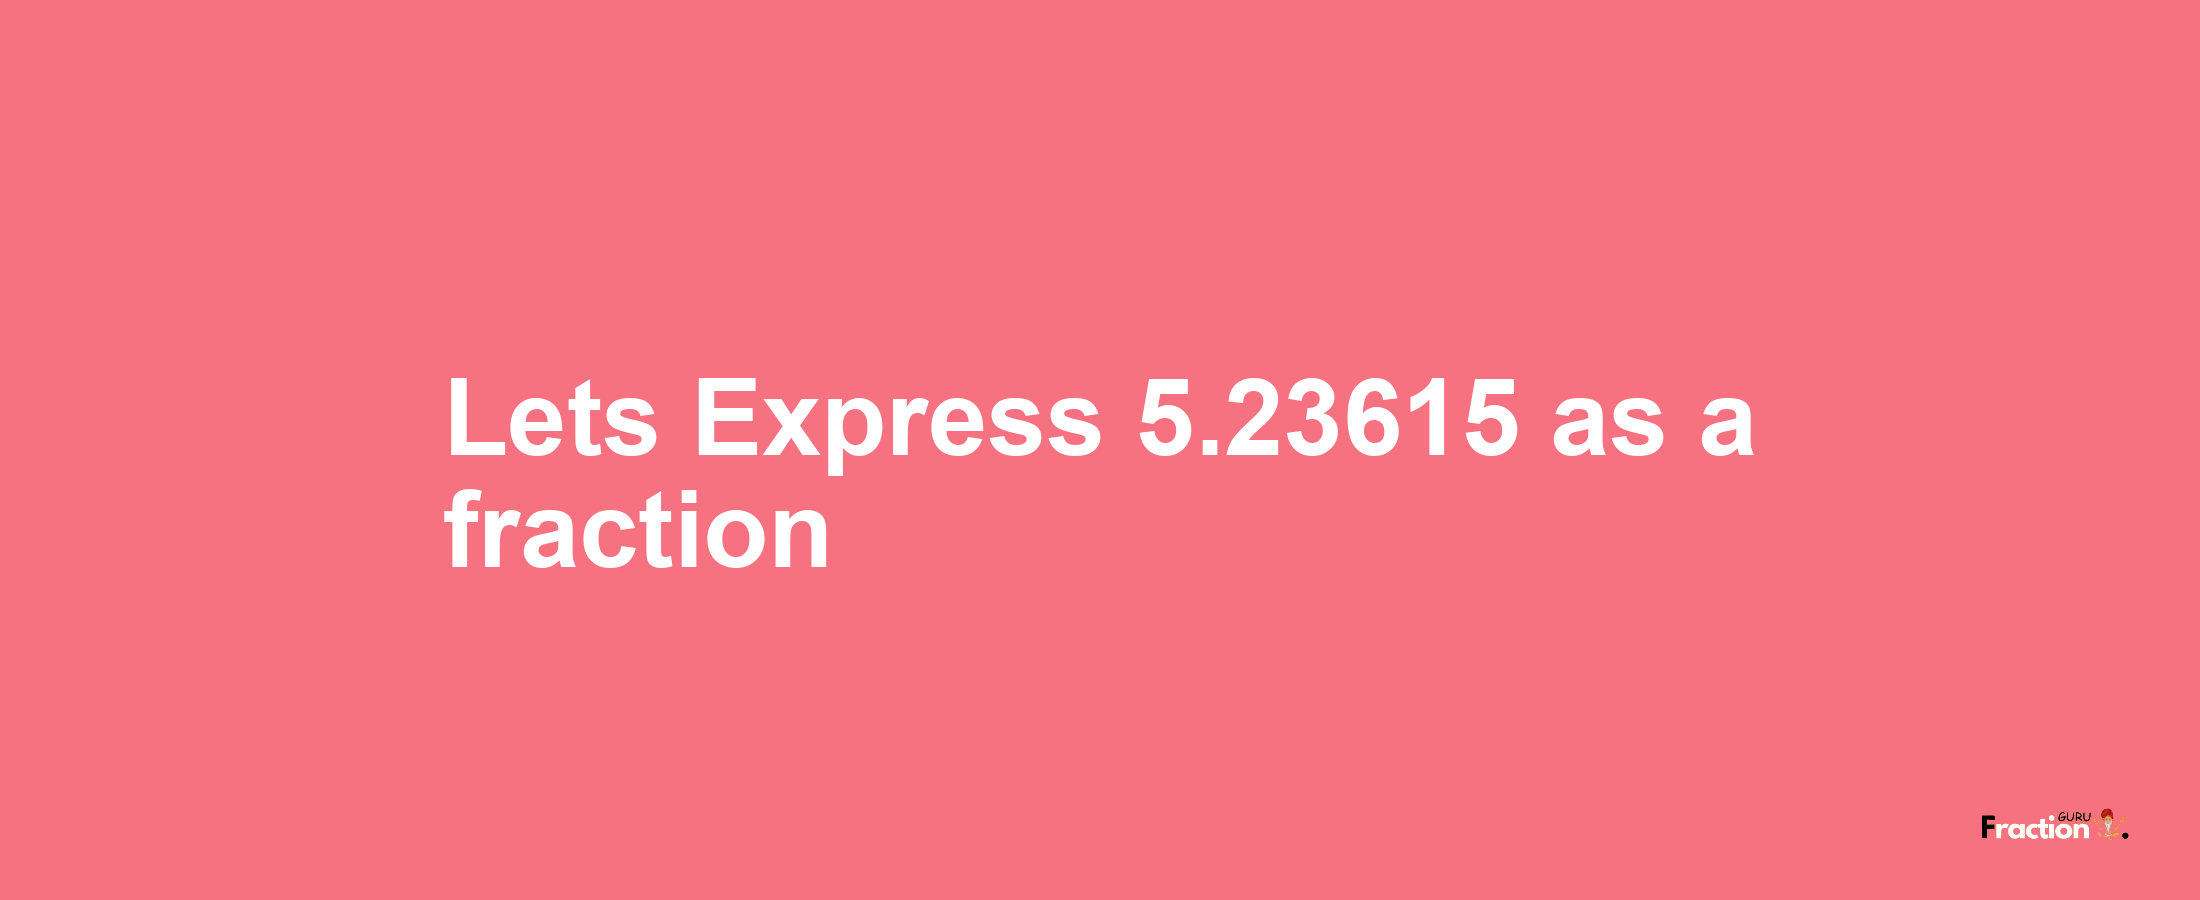 Lets Express 5.23615 as afraction